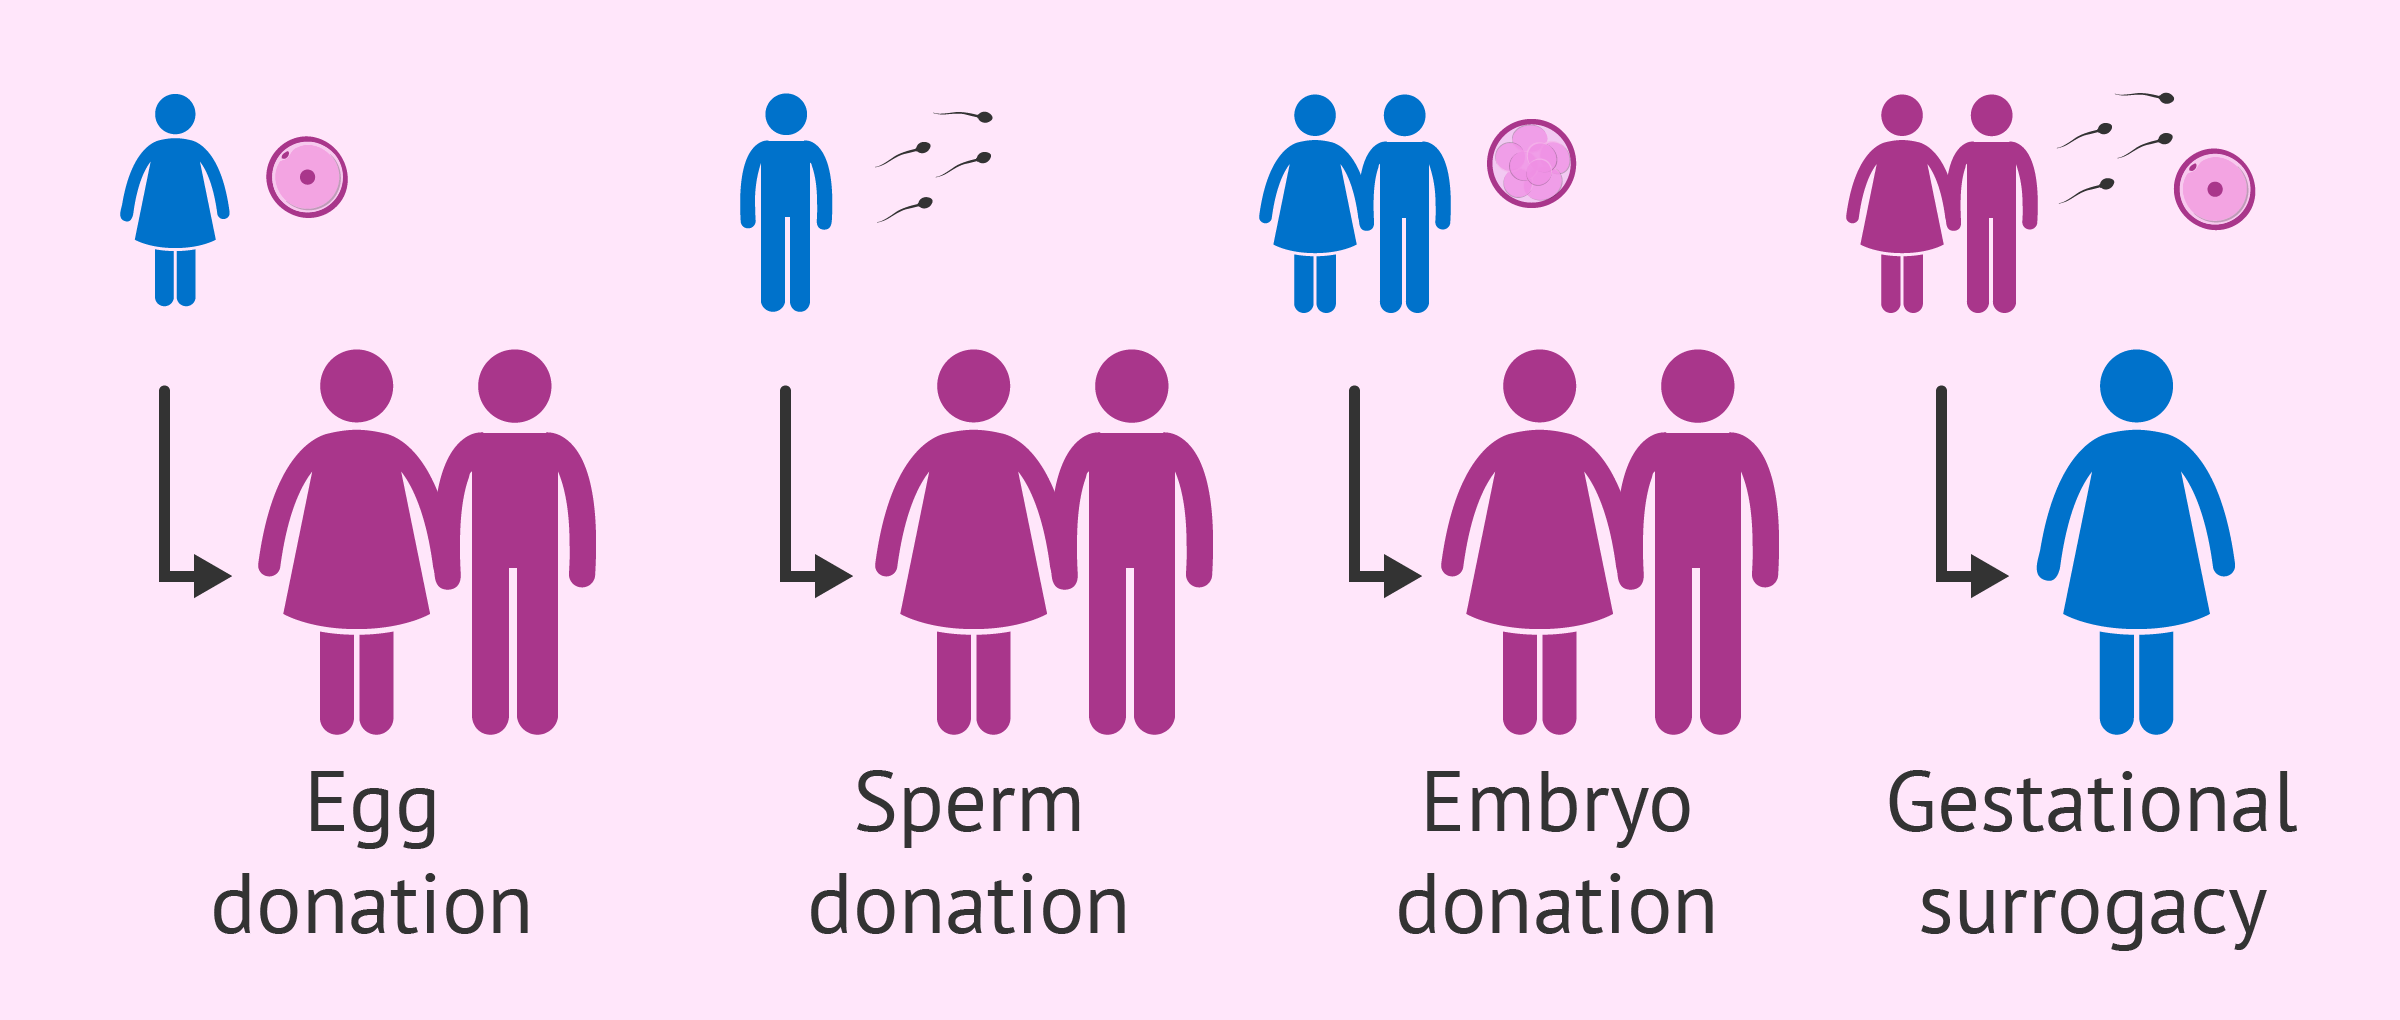 Egg and sperm donations